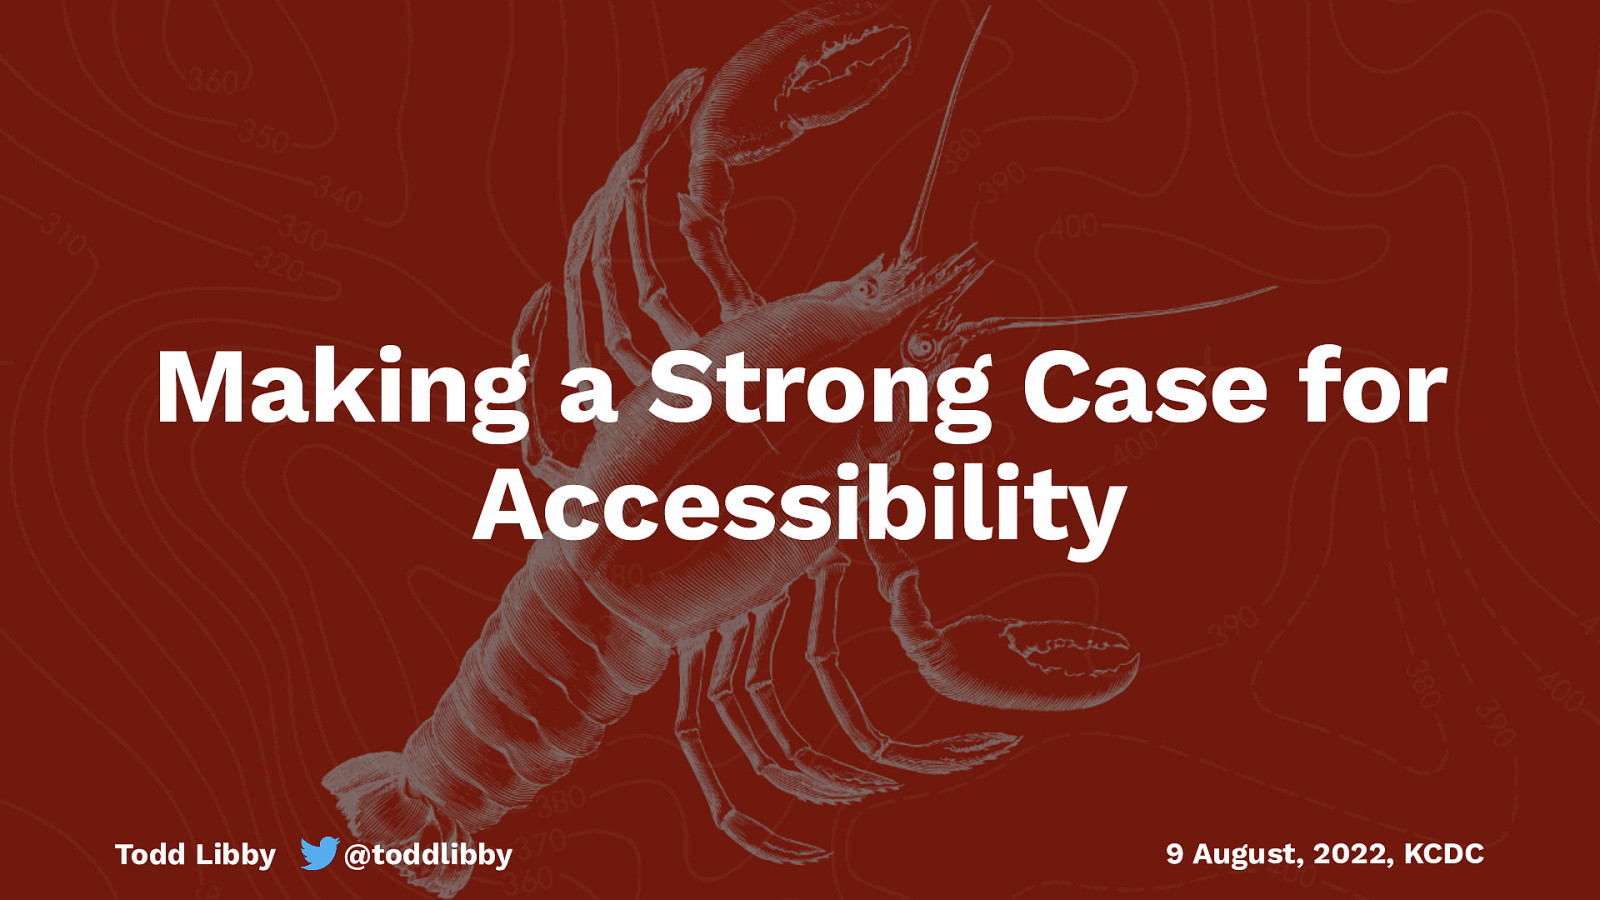 Making the Pragmatic Business Case for Accessibility